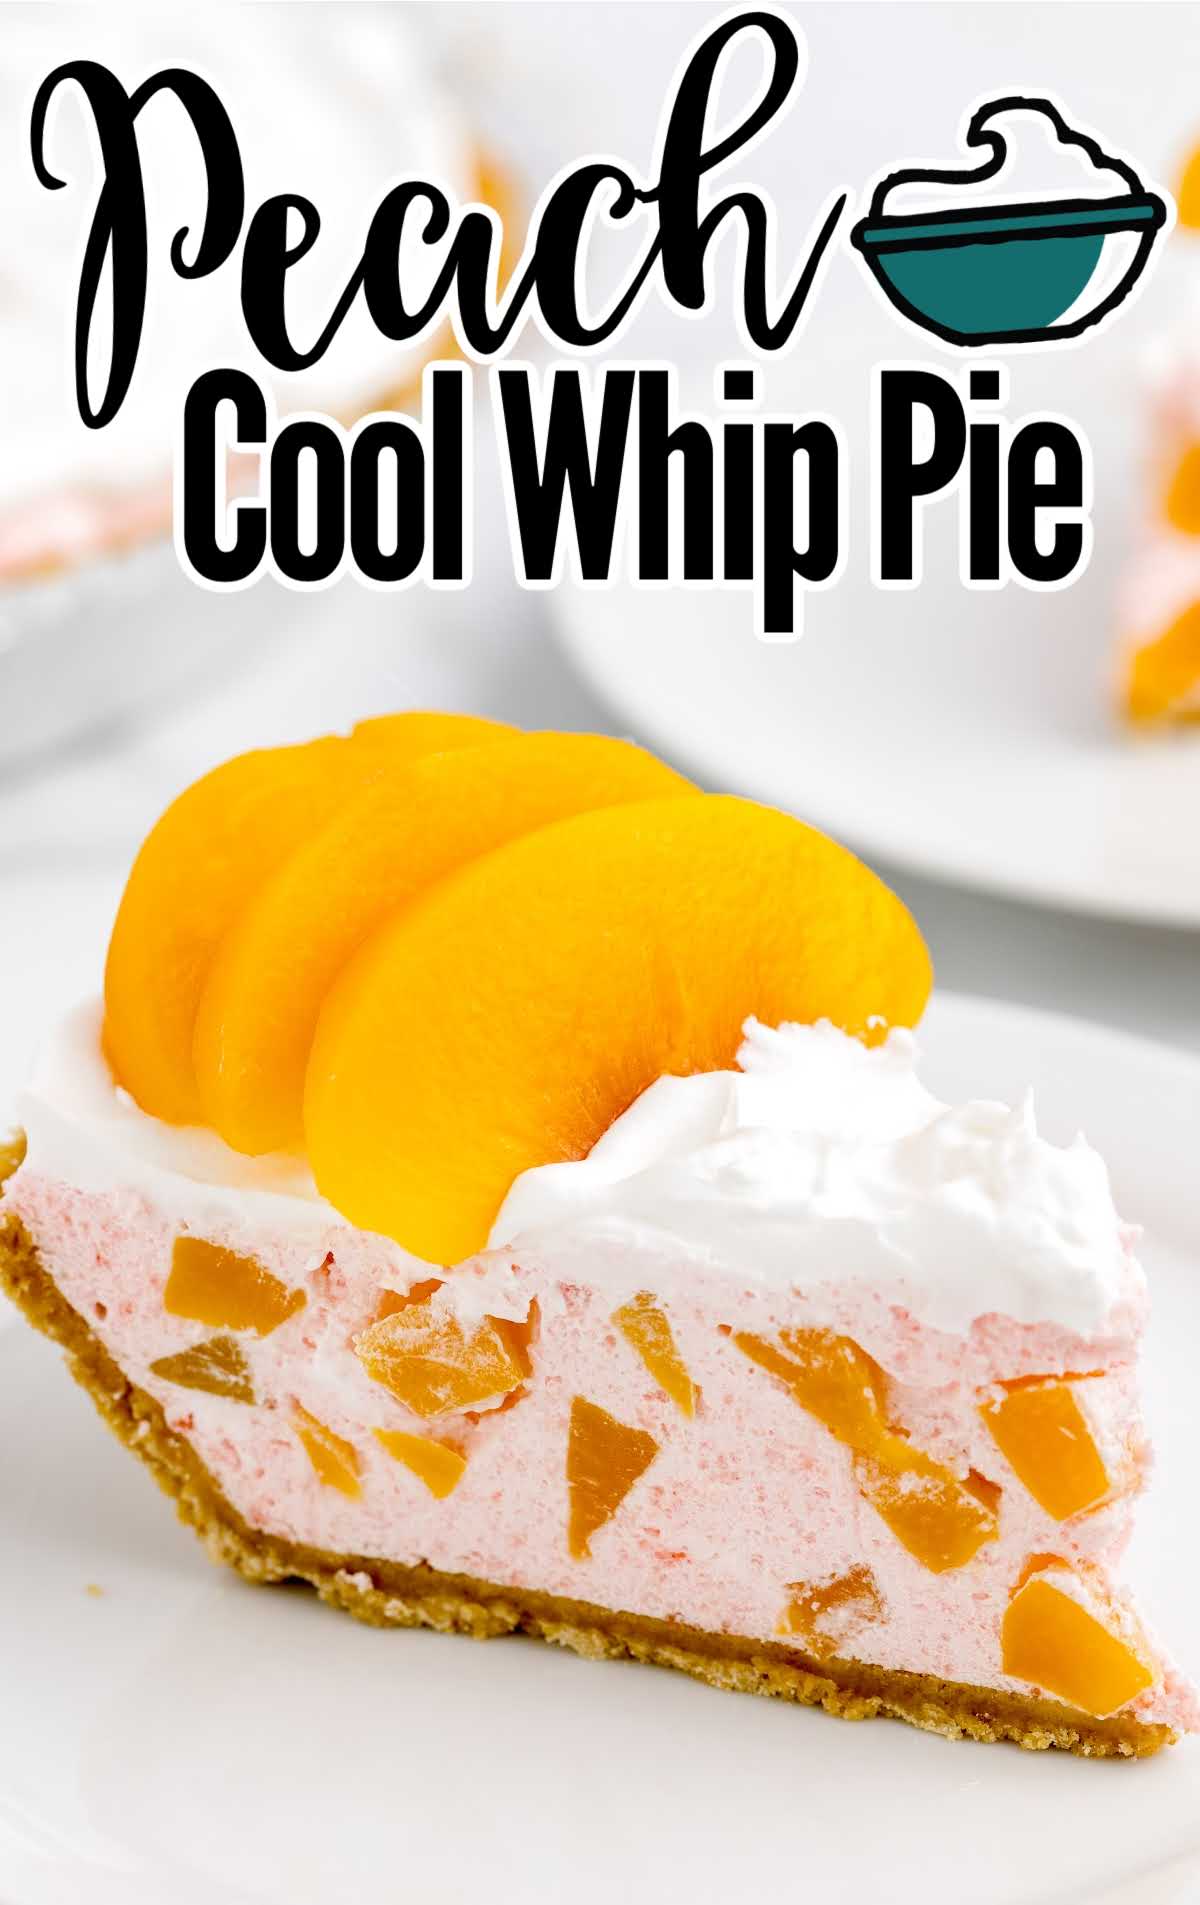 A piece of cake on a paper plate, with Peach and Cool Whip